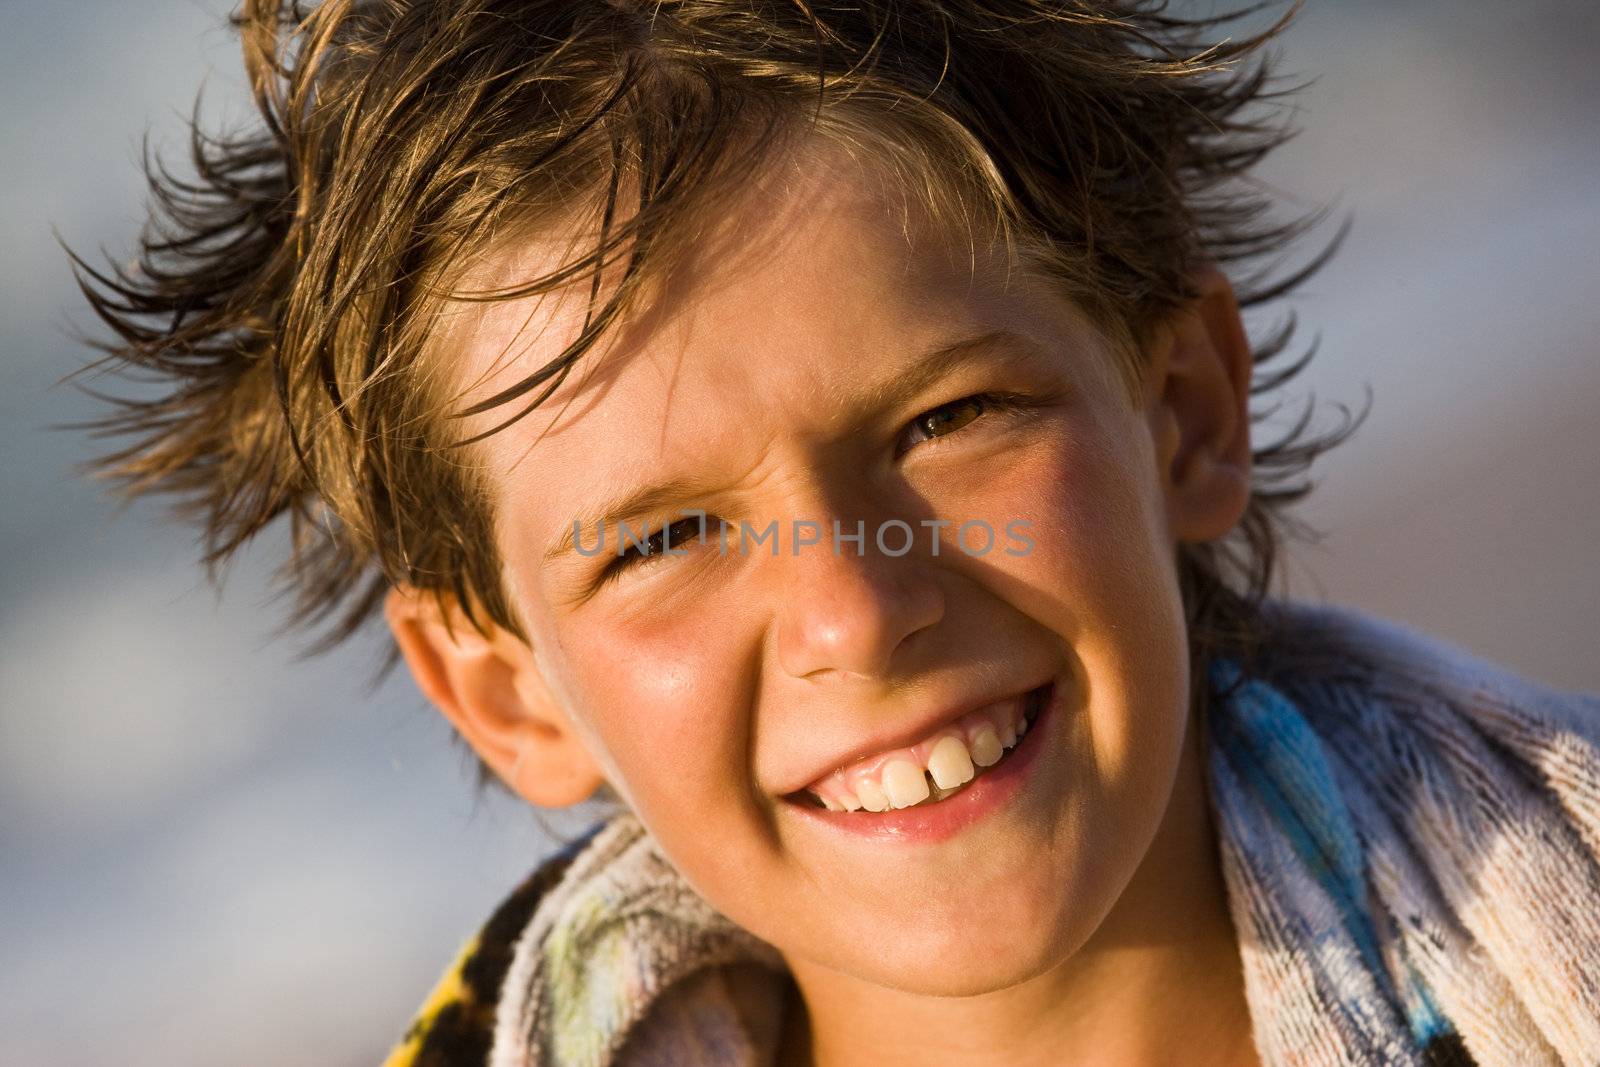 people series: portrait of smiling boy with wet hair